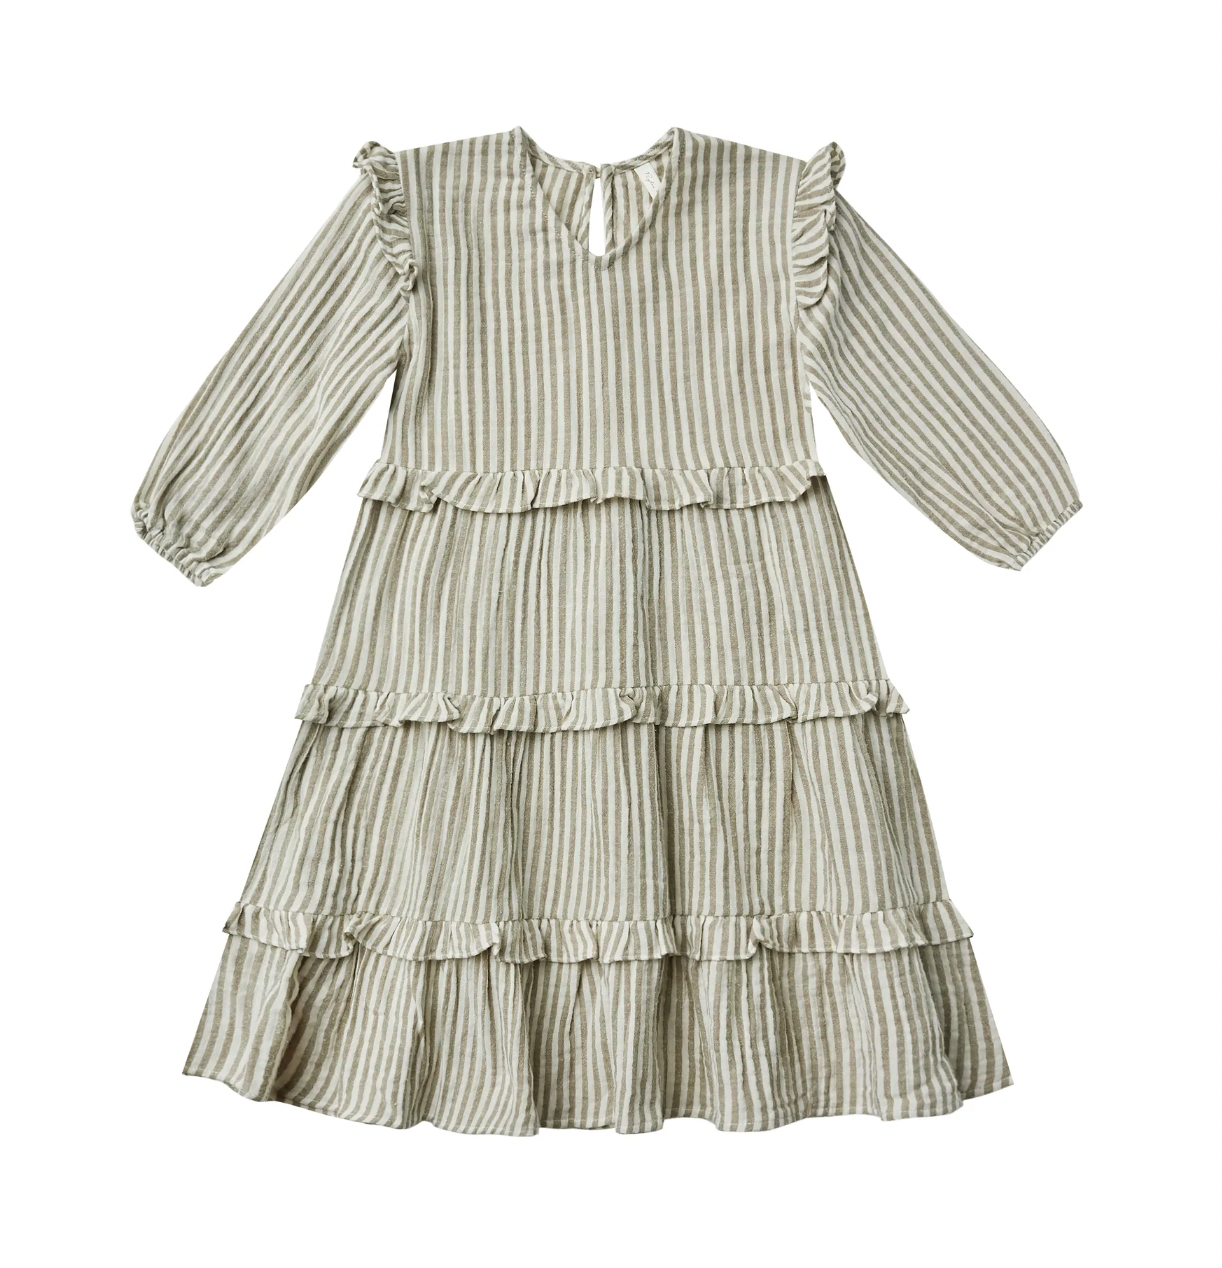 Mable Dress - Olive Stripe